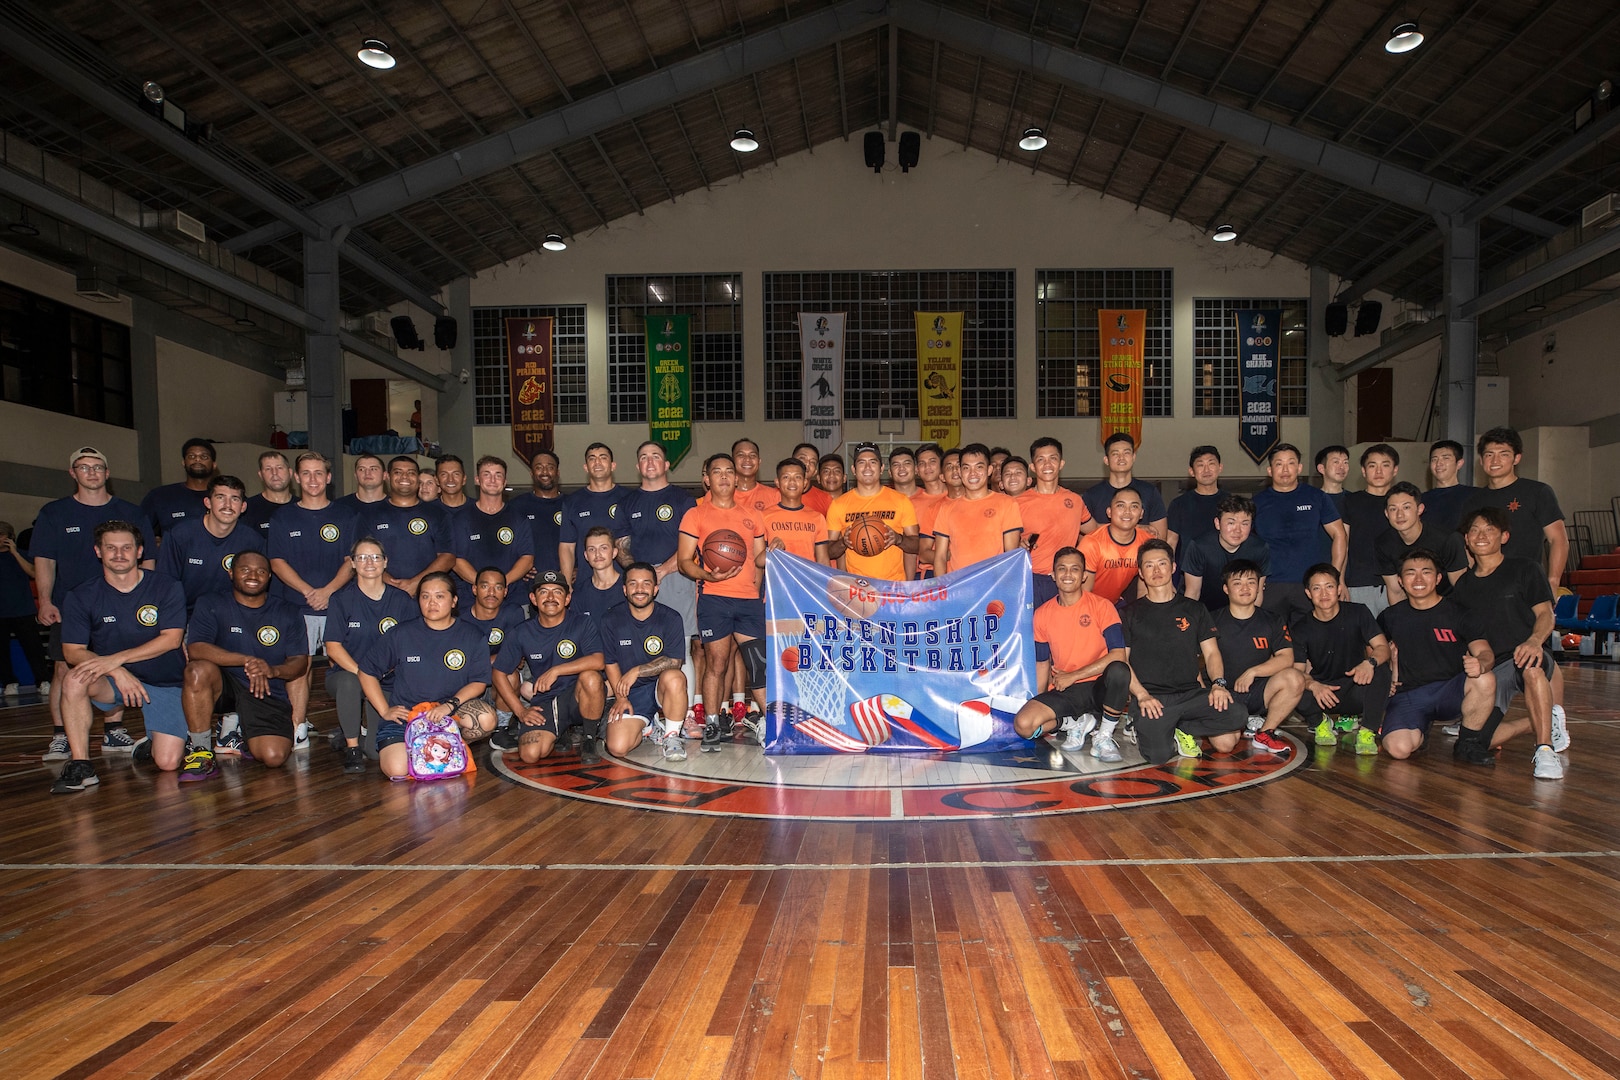 (From left) Sailors from U.S. Coast Guard Cutter Stratton (WMSL 752), the Philippine Coast Guard, and Japan Coast Guard Vessel Akitsushima (PLH 32) take part in a basketball tournament in Manila, Philippines, June 2 before beginning a multi-day trilateral exercise. Stratton deployed to the Western Pacific to conduct engagements with regional allies and partner nations, reinforcing a rules-based order in the maritime domain. (U.S. Navy photo by Chief Petty Officer Brett Cote)